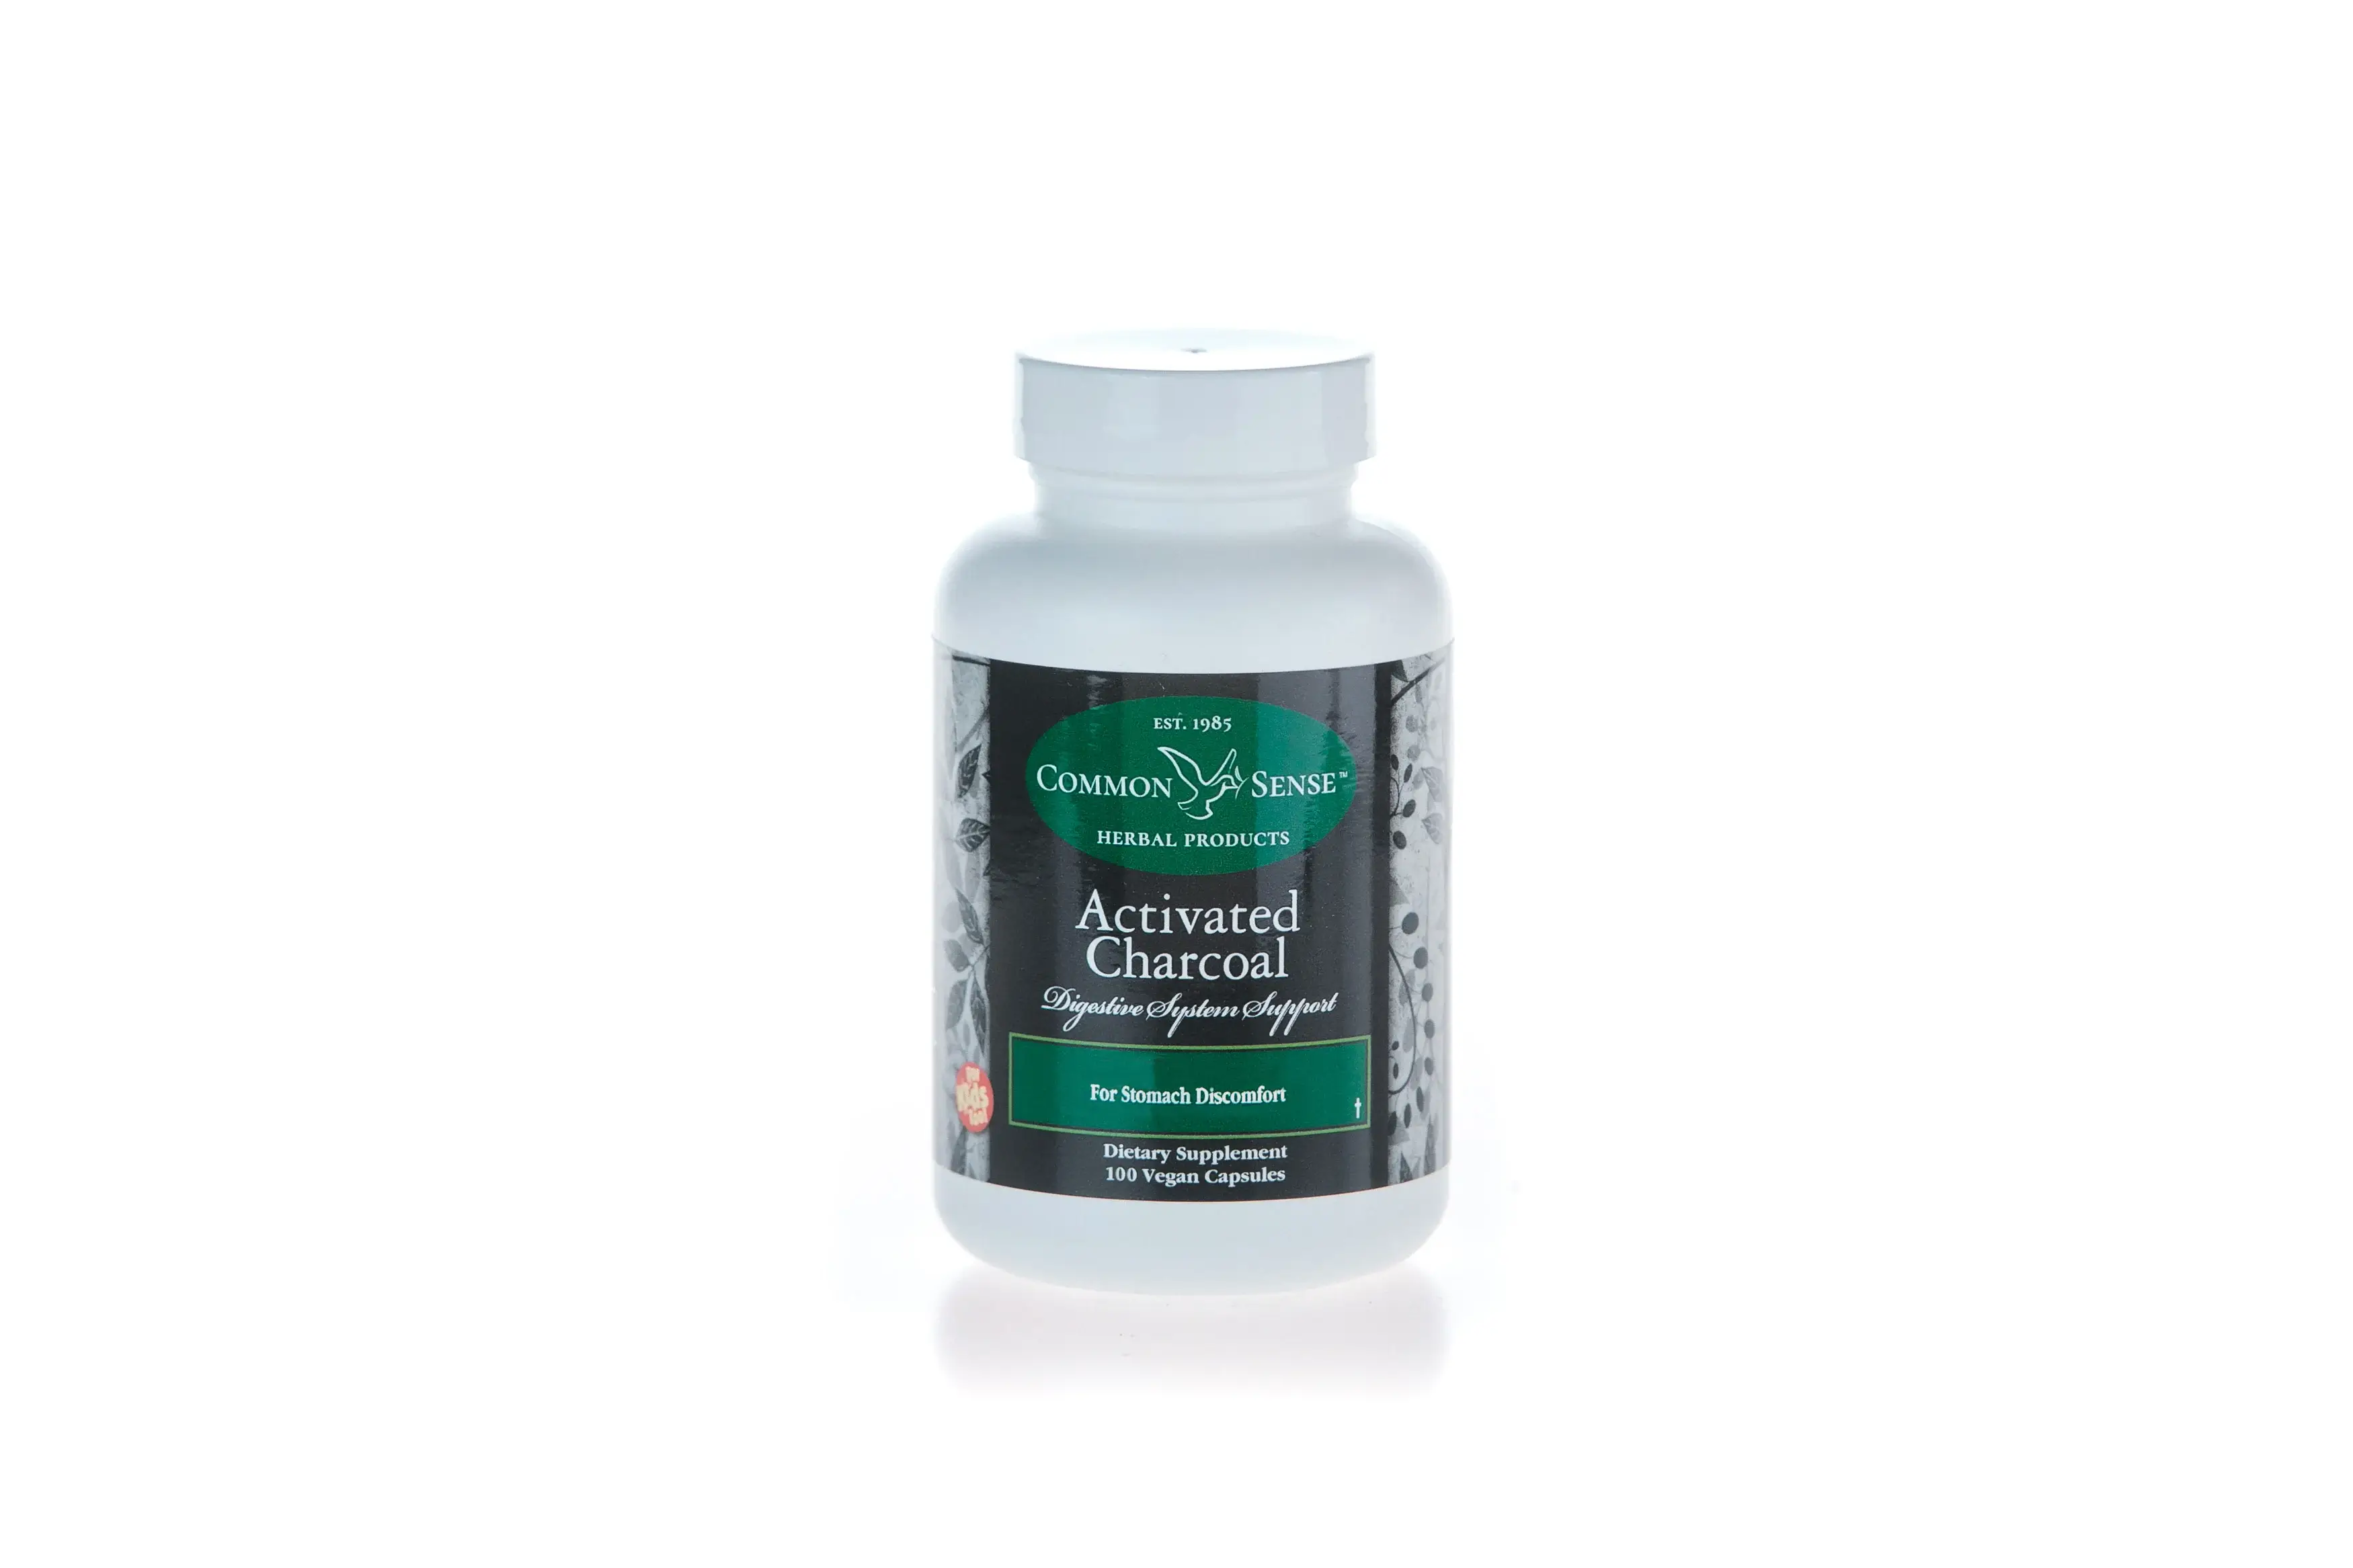 Activated Charcoal (100 Vegan Capsules)